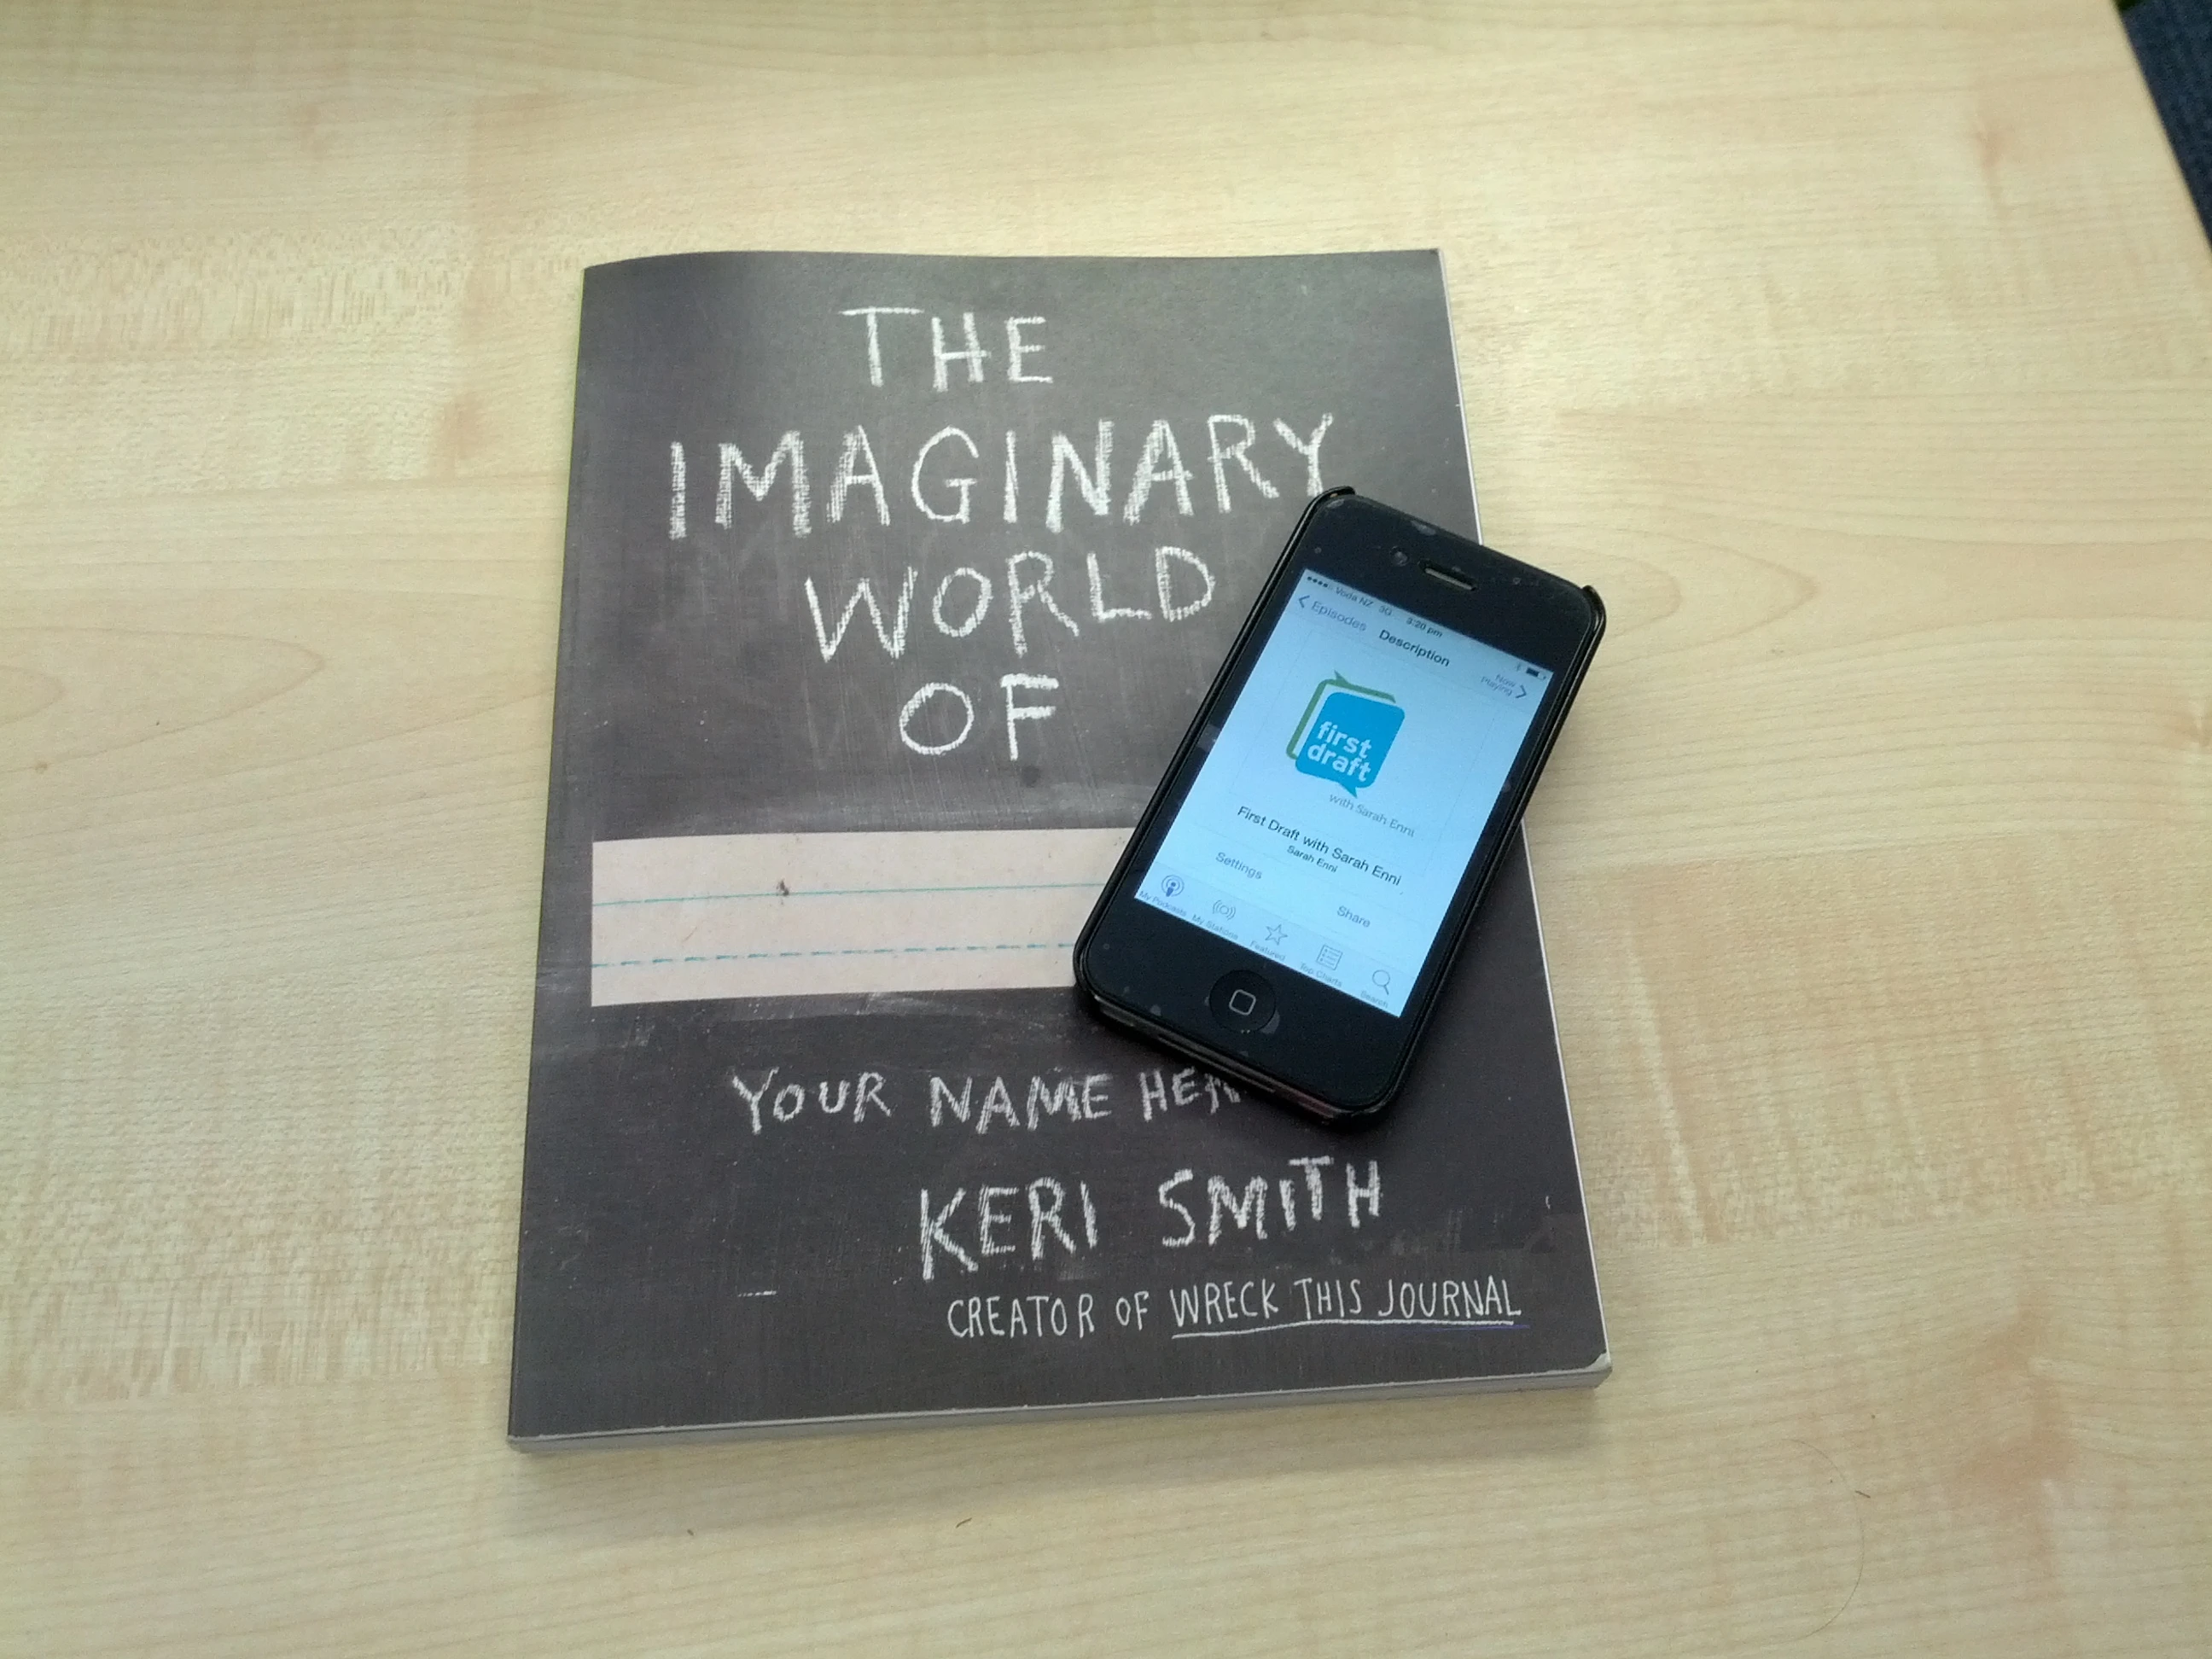 An Iphone on top of a book titled 'The imaginary world of'.